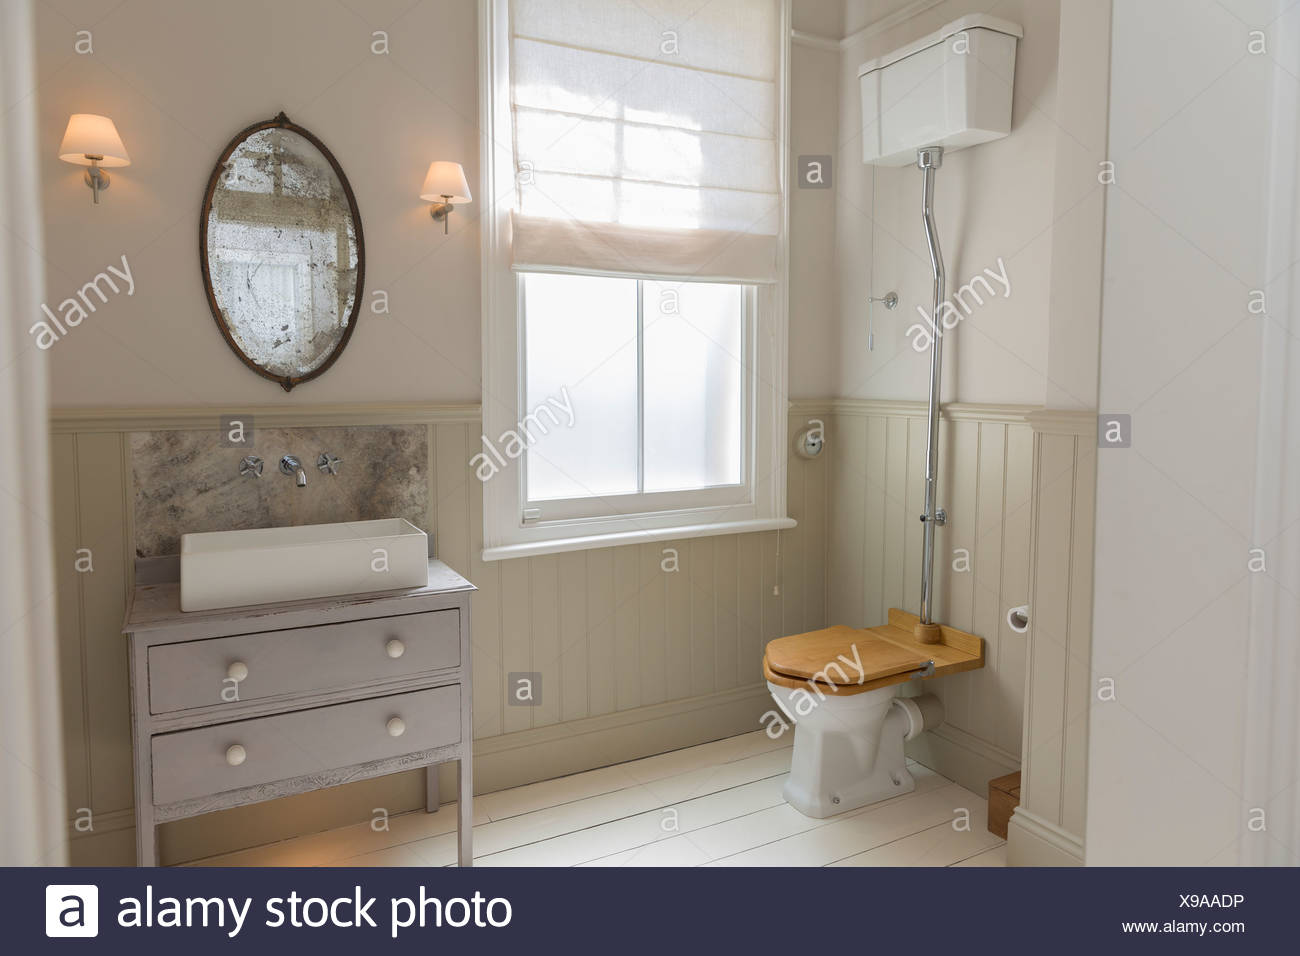 Toilet And Sink In Ornate Bathroom Stock Photo 281125538 Alamy